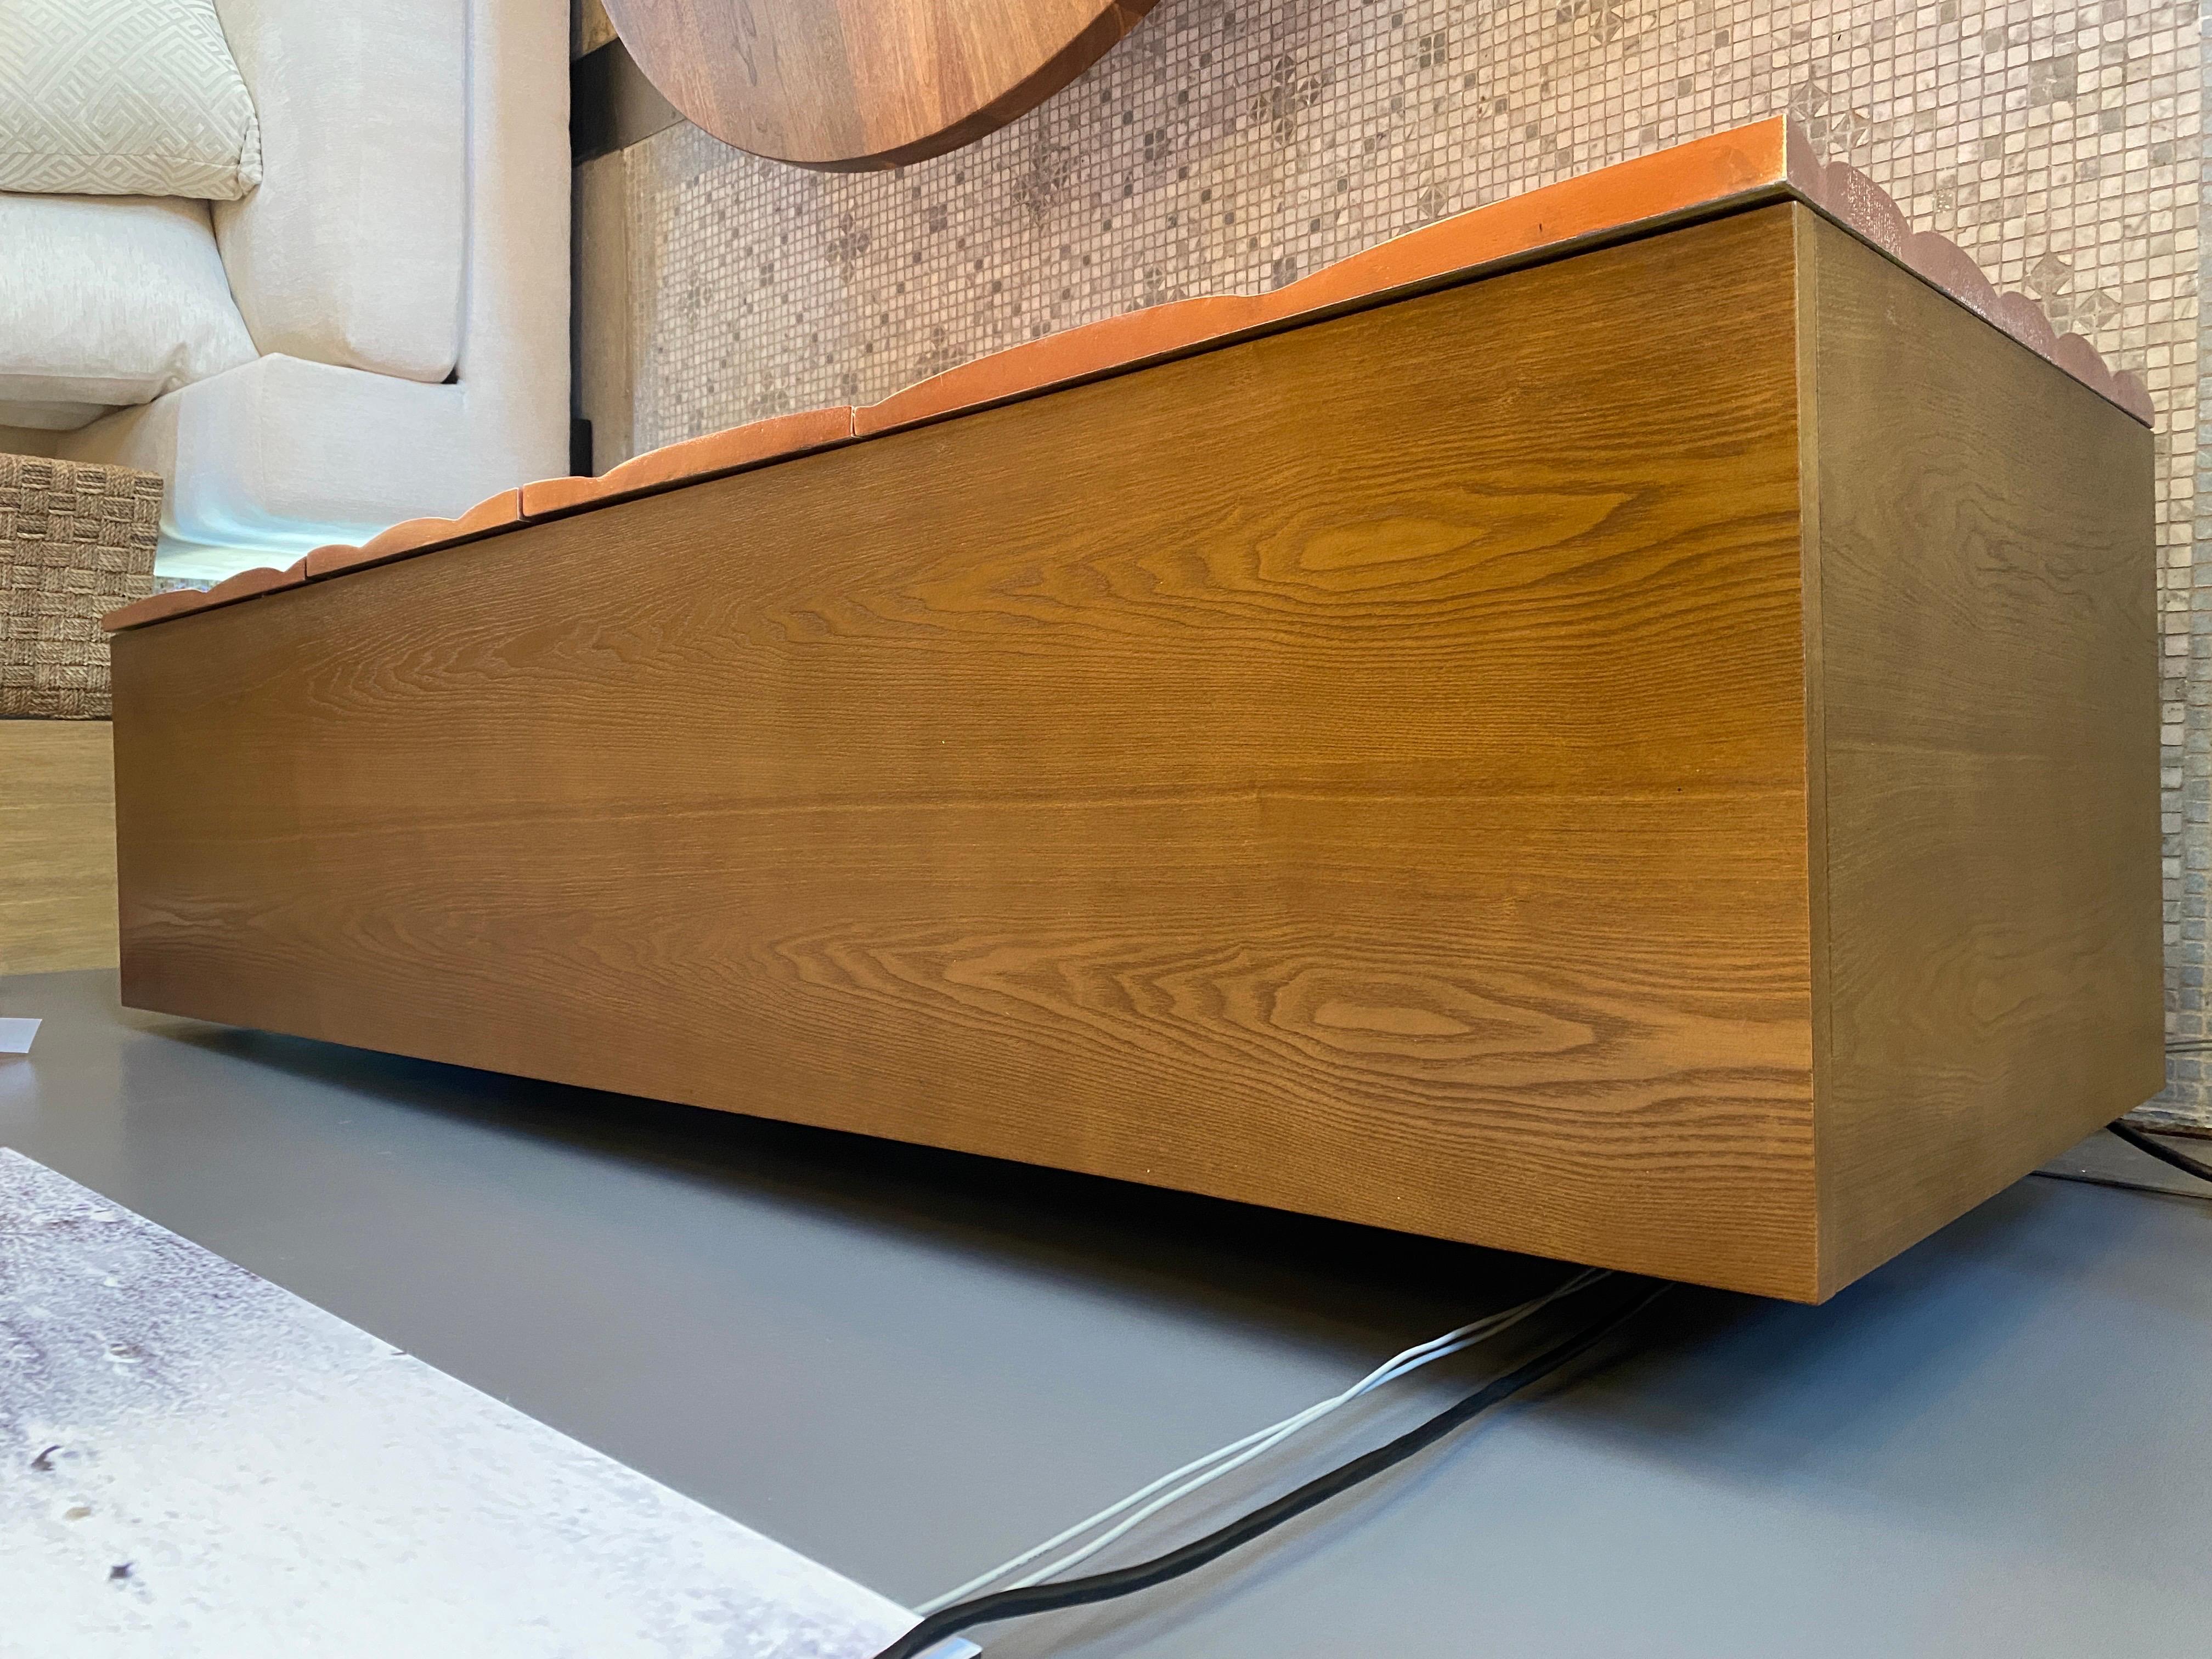 Swerve credenza, beautiful copper color mixed wood. Beautiful craftsmanship!